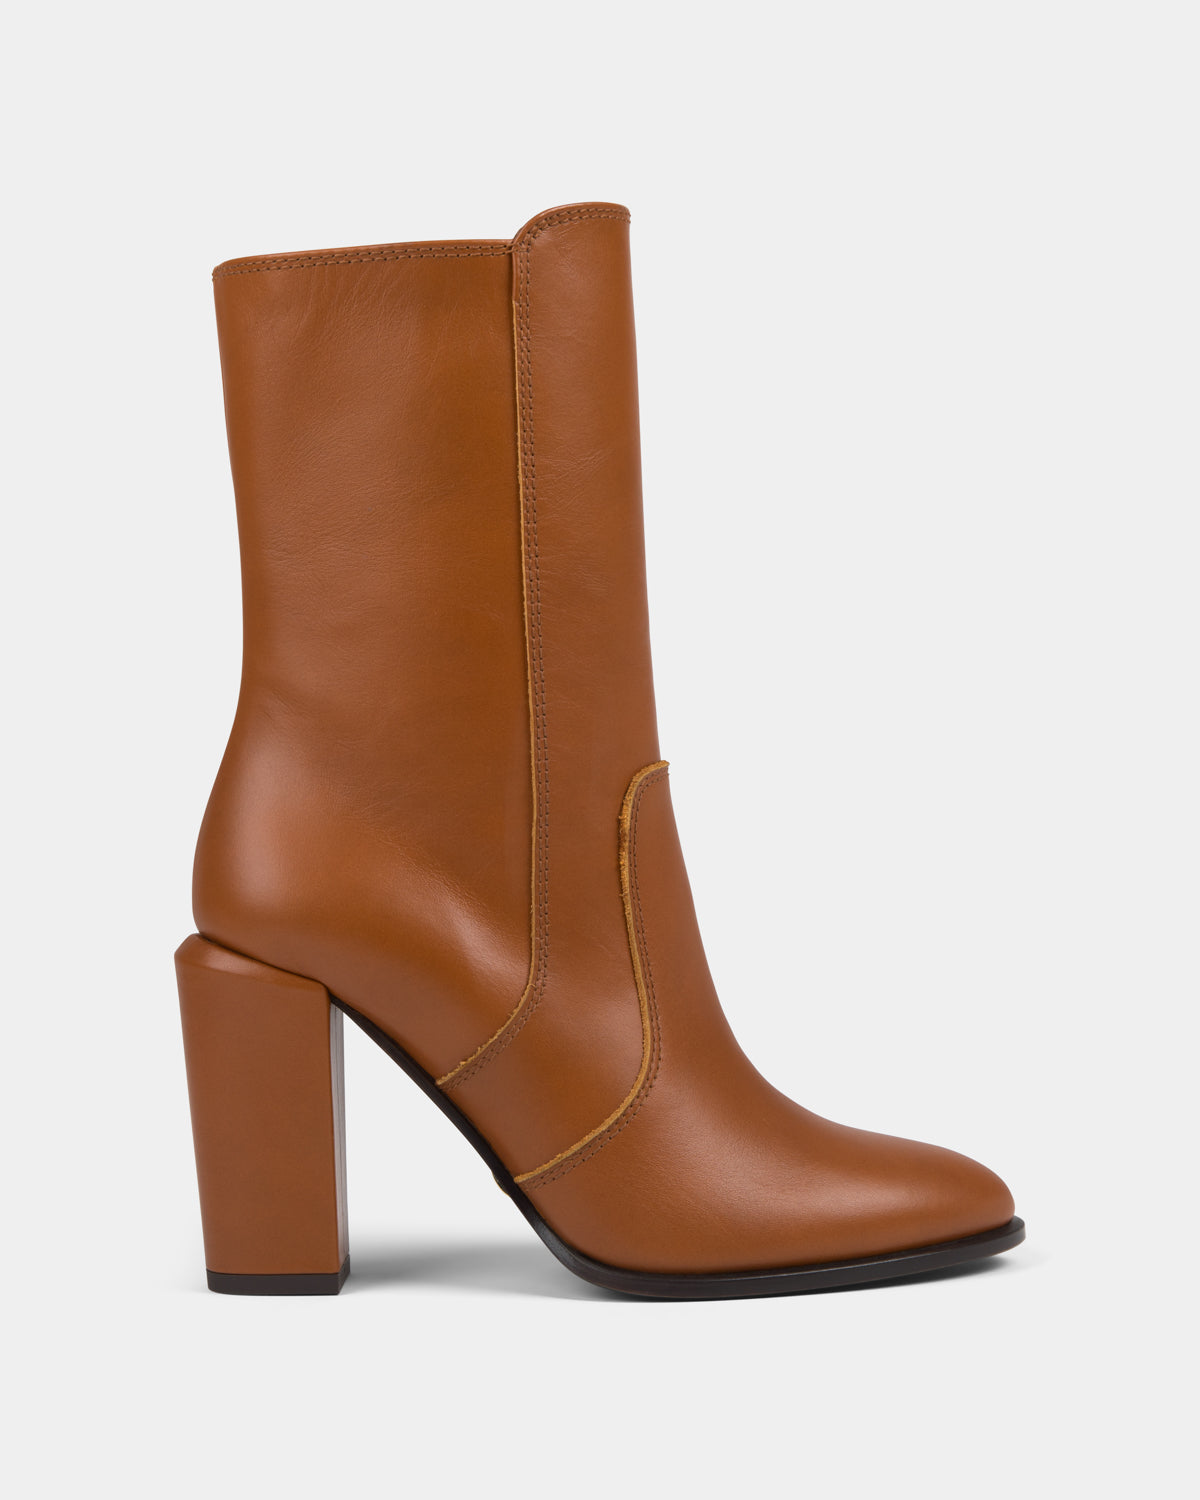 kallu-kallú-brown-leather-shoes-for-women-made-in-spain-boots-ankle-boots-booties-low-cut-boots